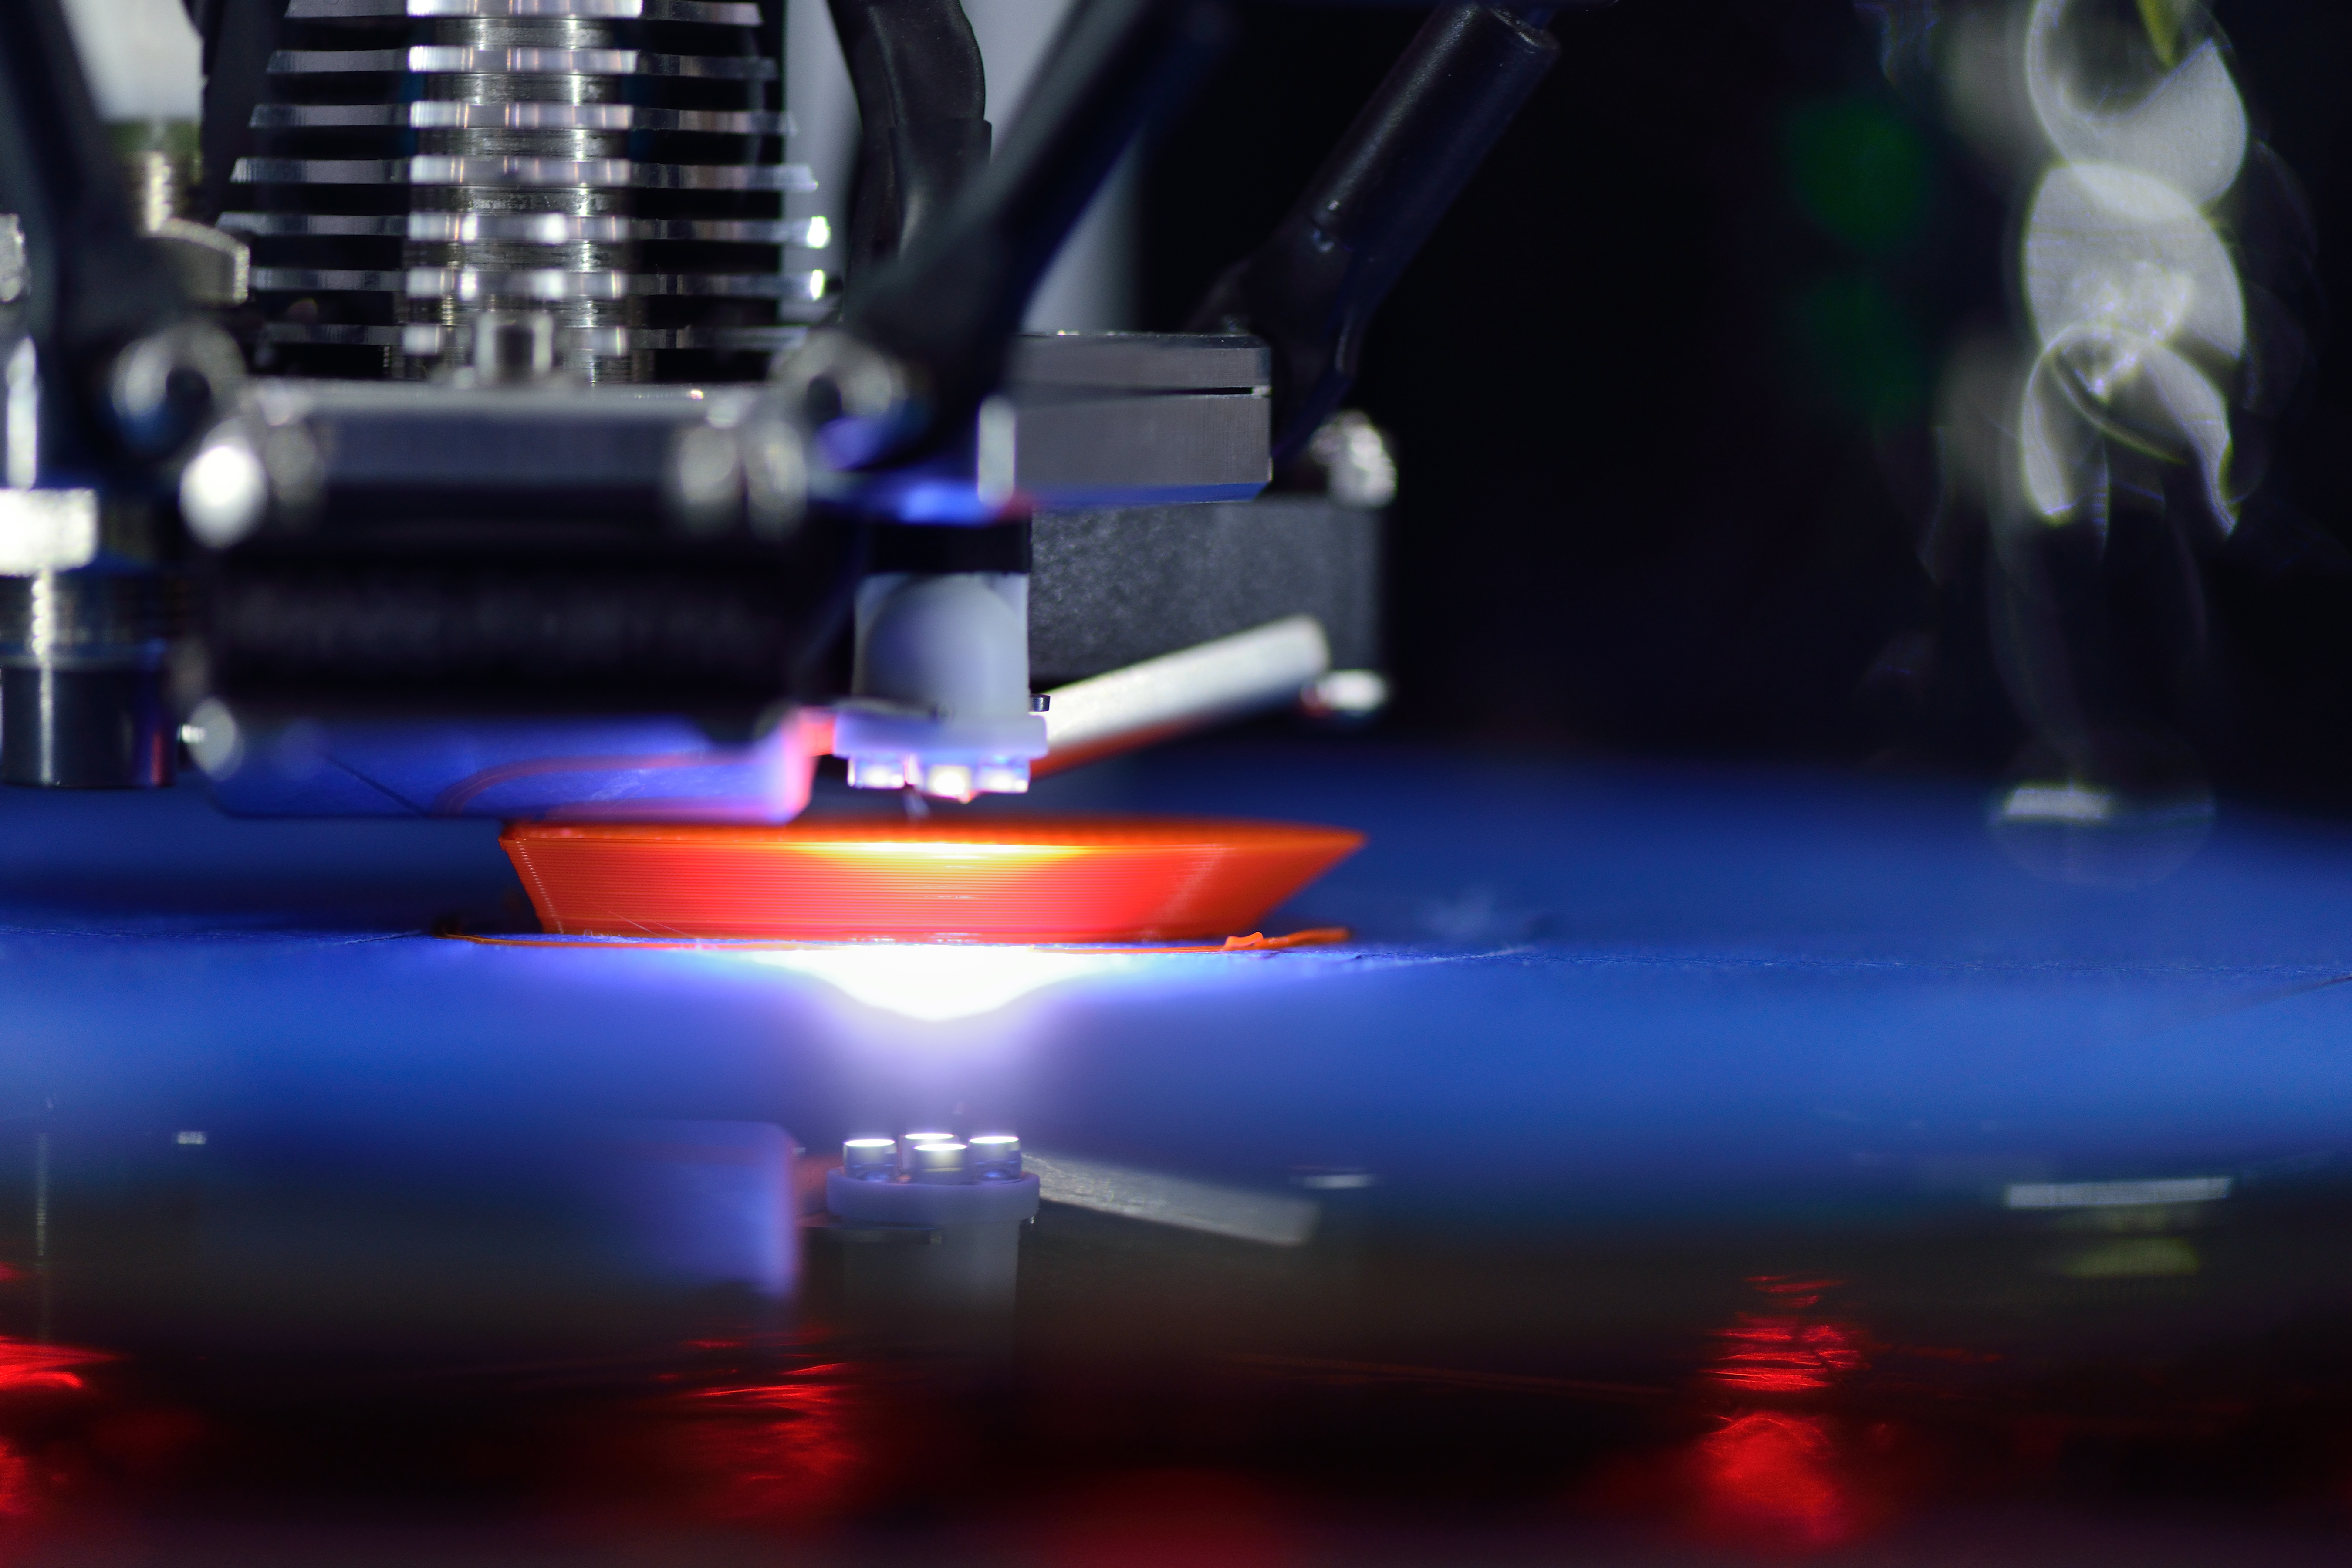 Carbon emissions savings from 3D printing